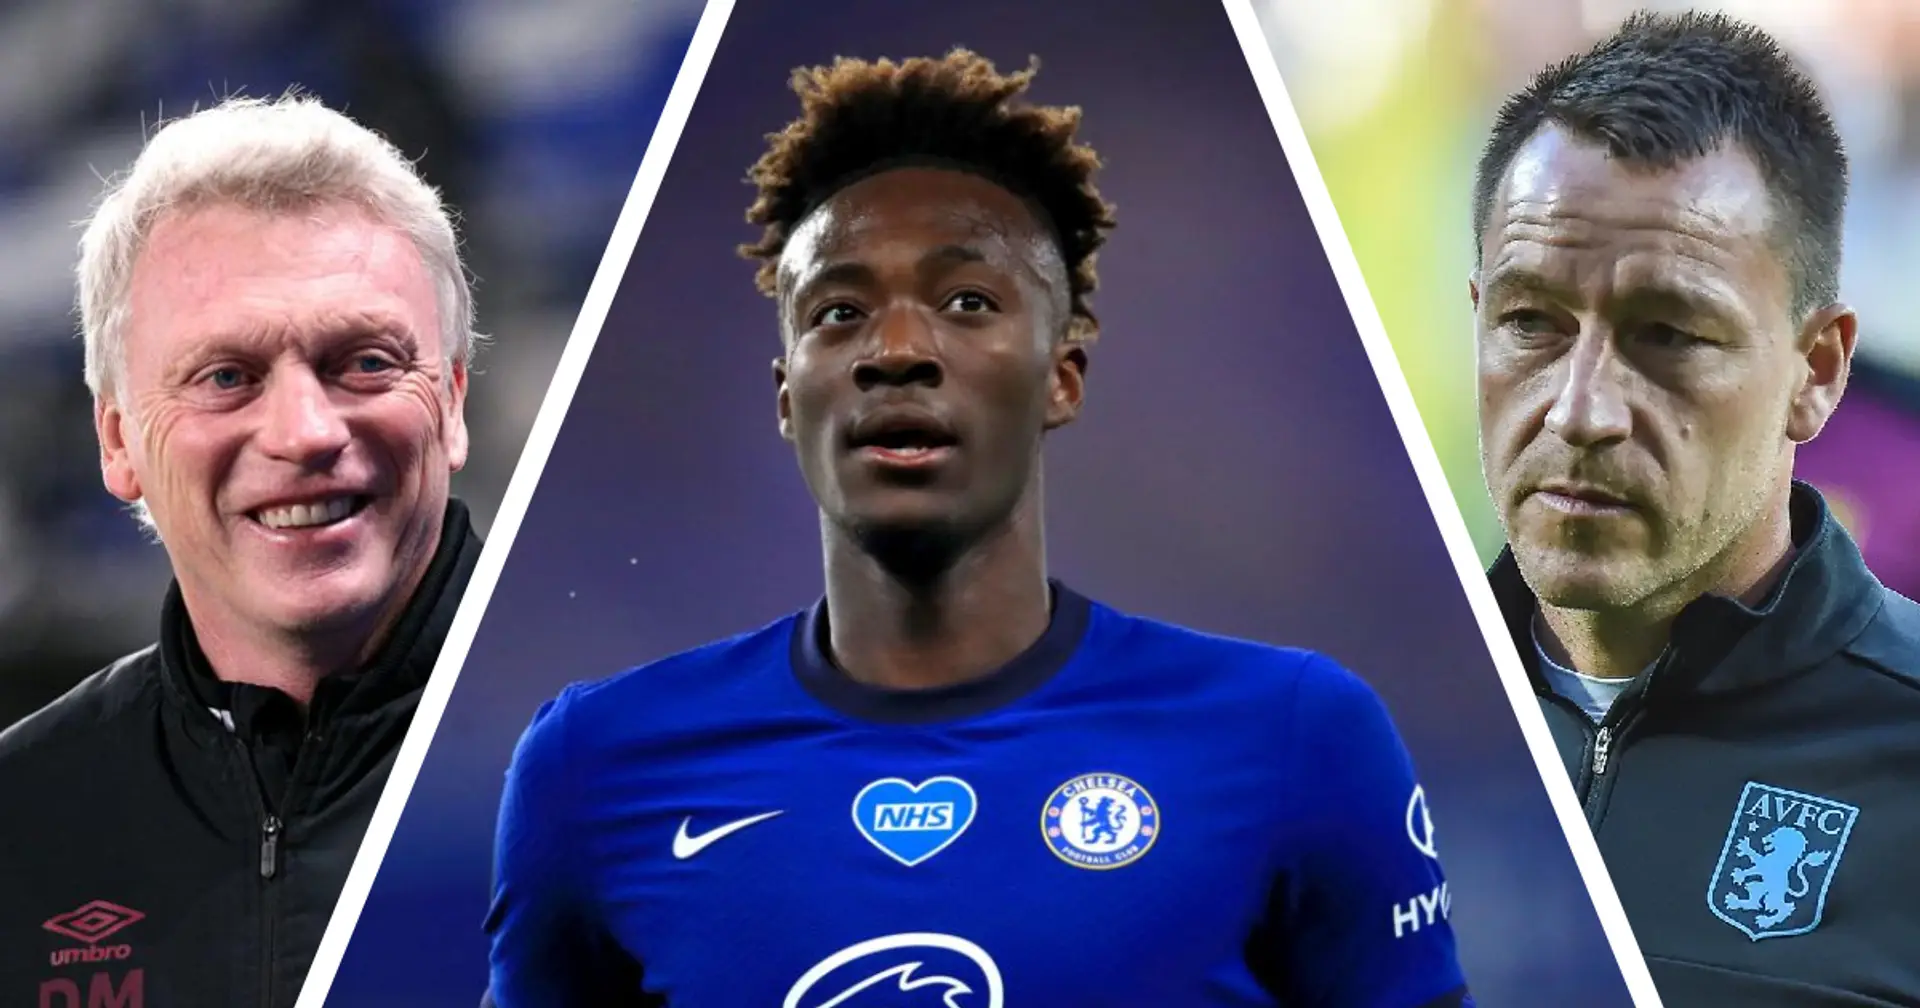 West Ham overtakes Aston Villa in race to sign Tammy Abraham (reliability: 3 stars)